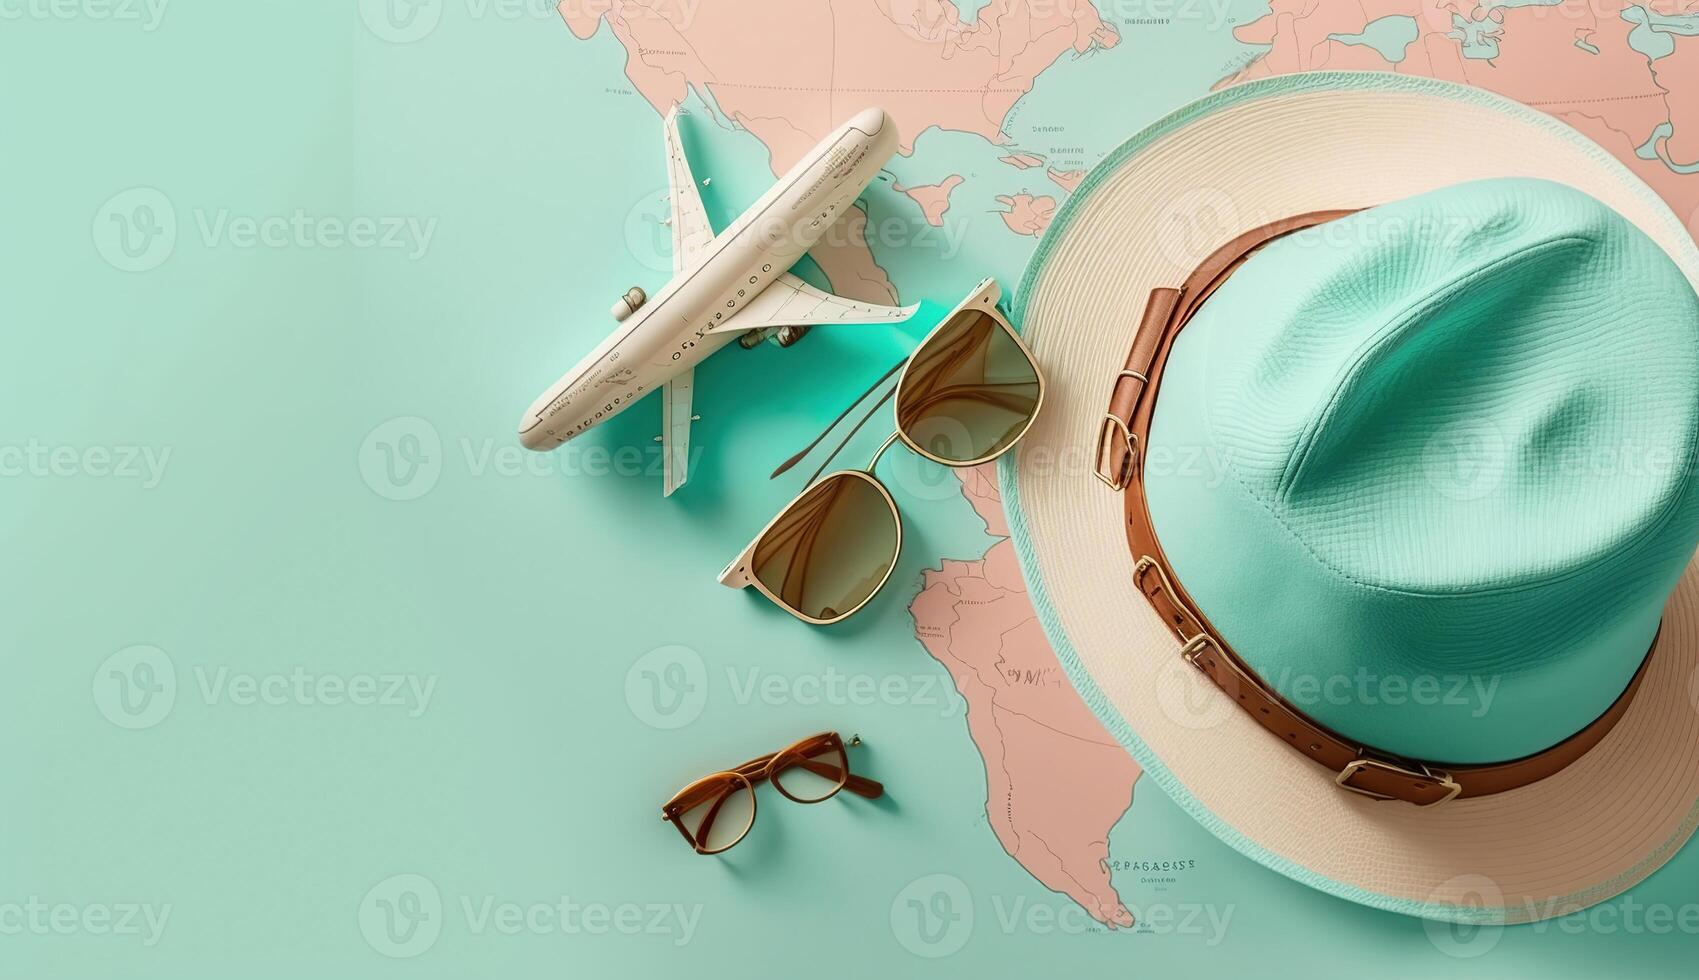 Straw hat, map, plane, sunglasses and magnifying glass on blue background. Summer holiday, vacation, travel concept. Flat lay, top view, copy space. photo